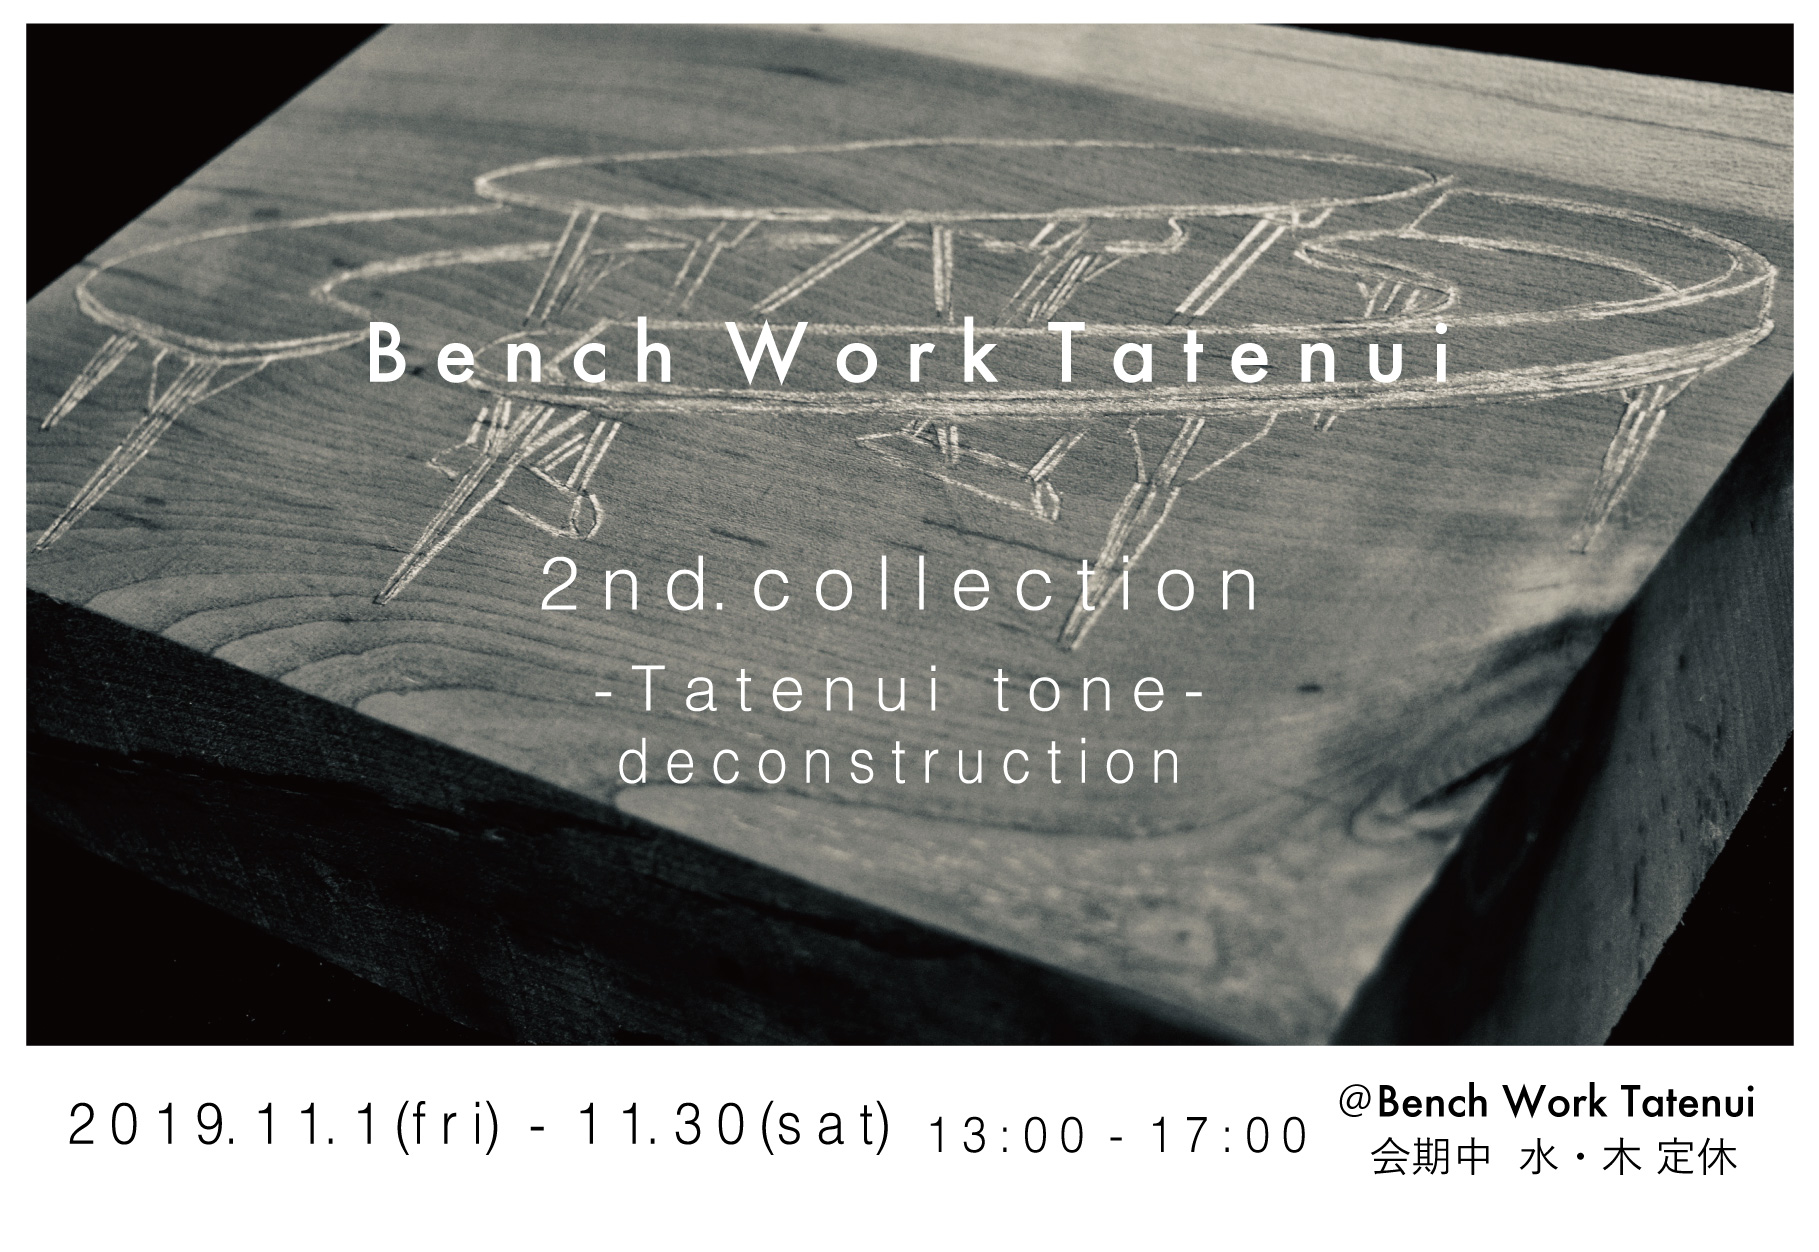 【Bench Work Tatenui 2nd.collection -Tatenui tone-deconstruction】のご案内